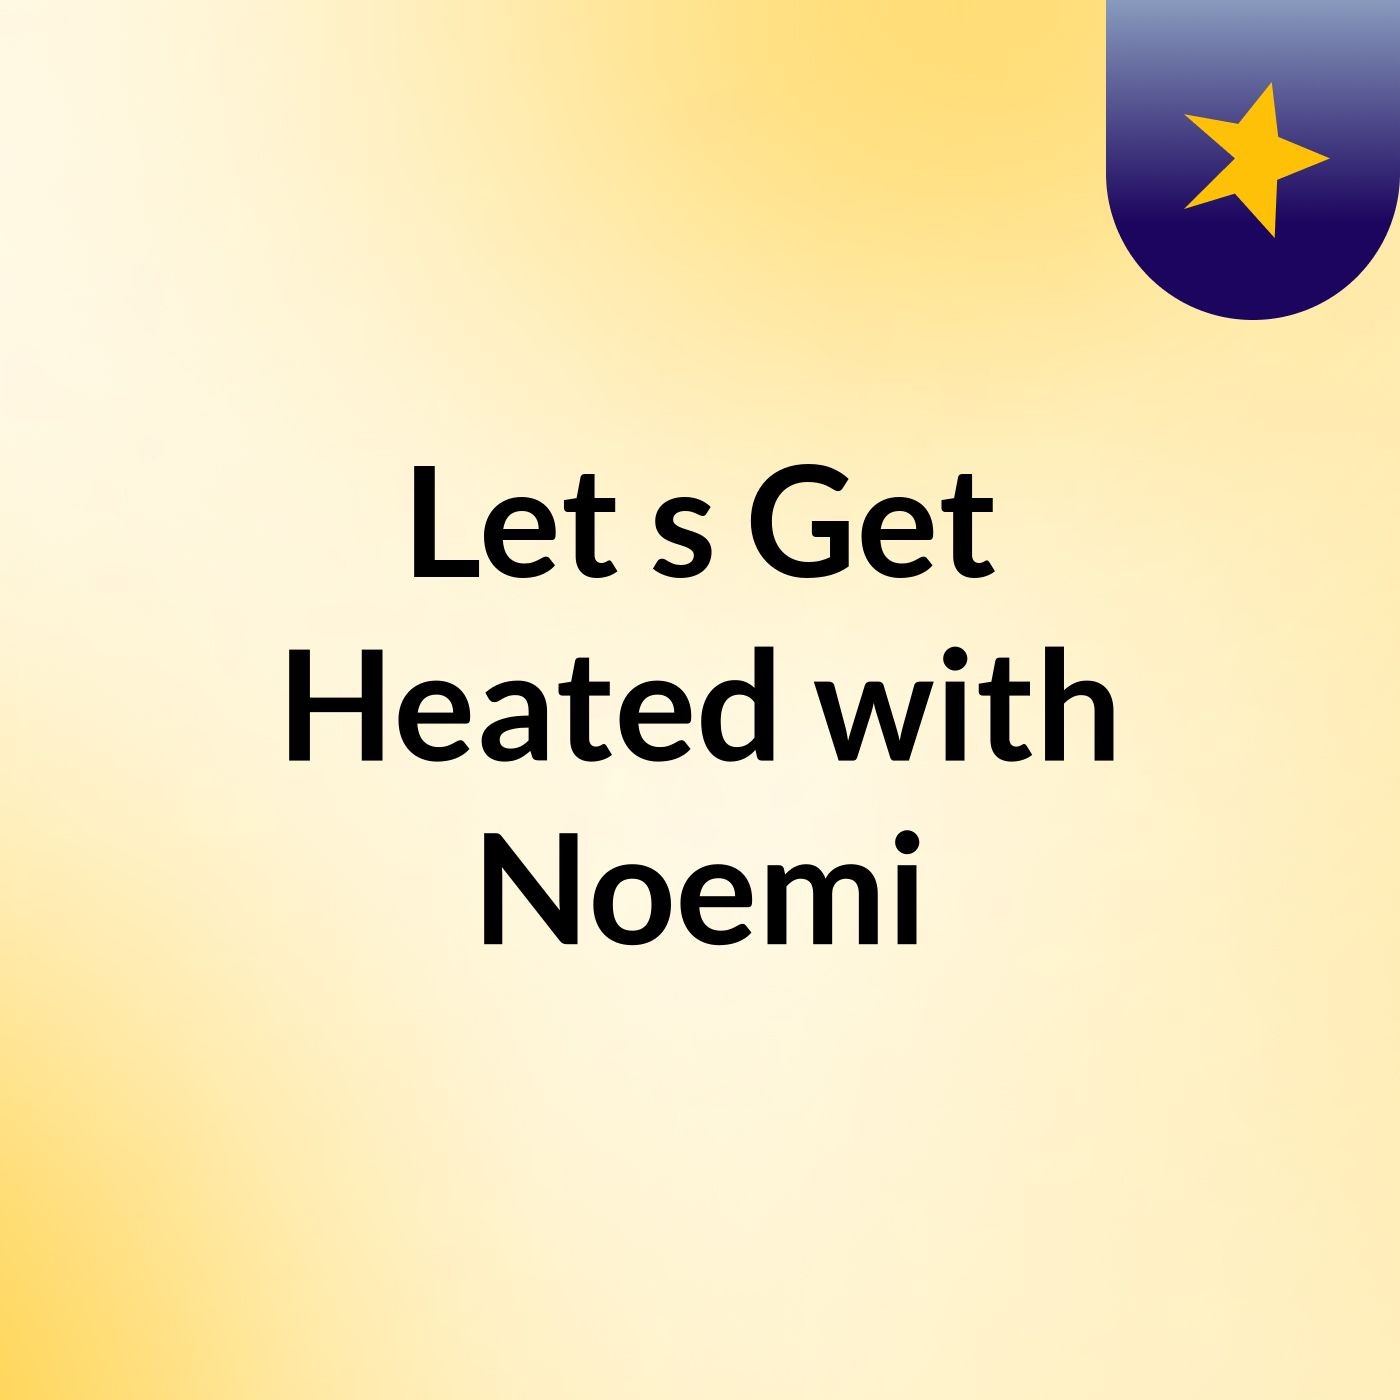 Let's Get Heated with Noemi